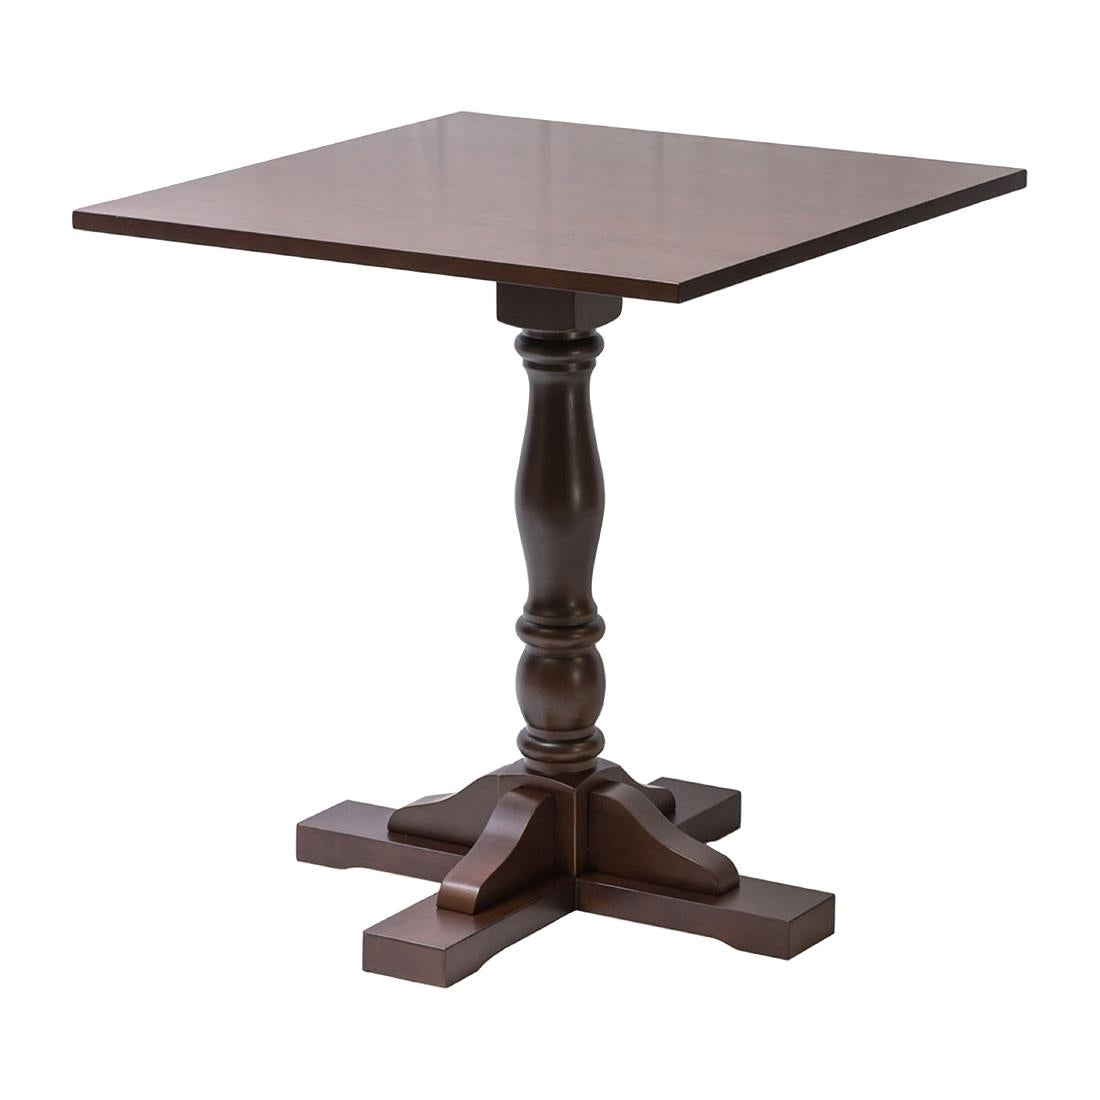 FT497 Oxford Dark Wood Pedestal Square Table 700x700mm JD Catering Equipment Solutions Ltd